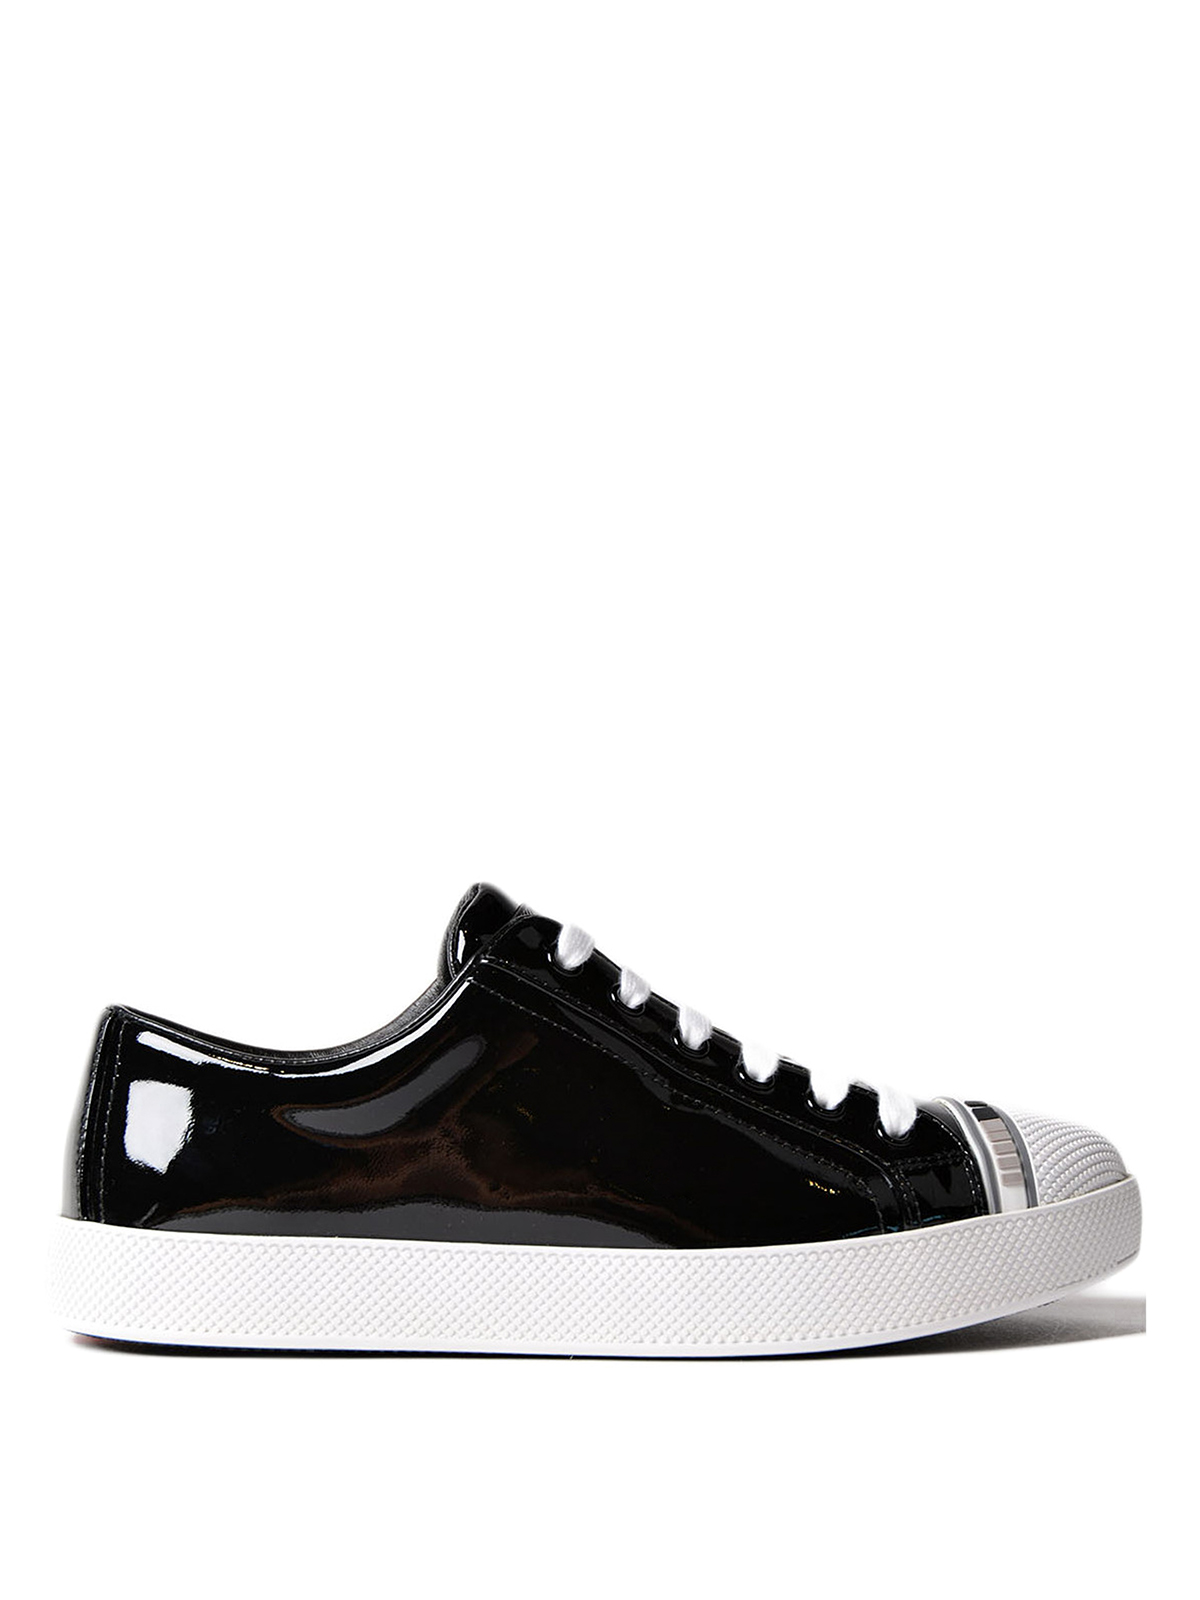 Trainers Prada - Patent leather sneakers - 3E6335OYG967 